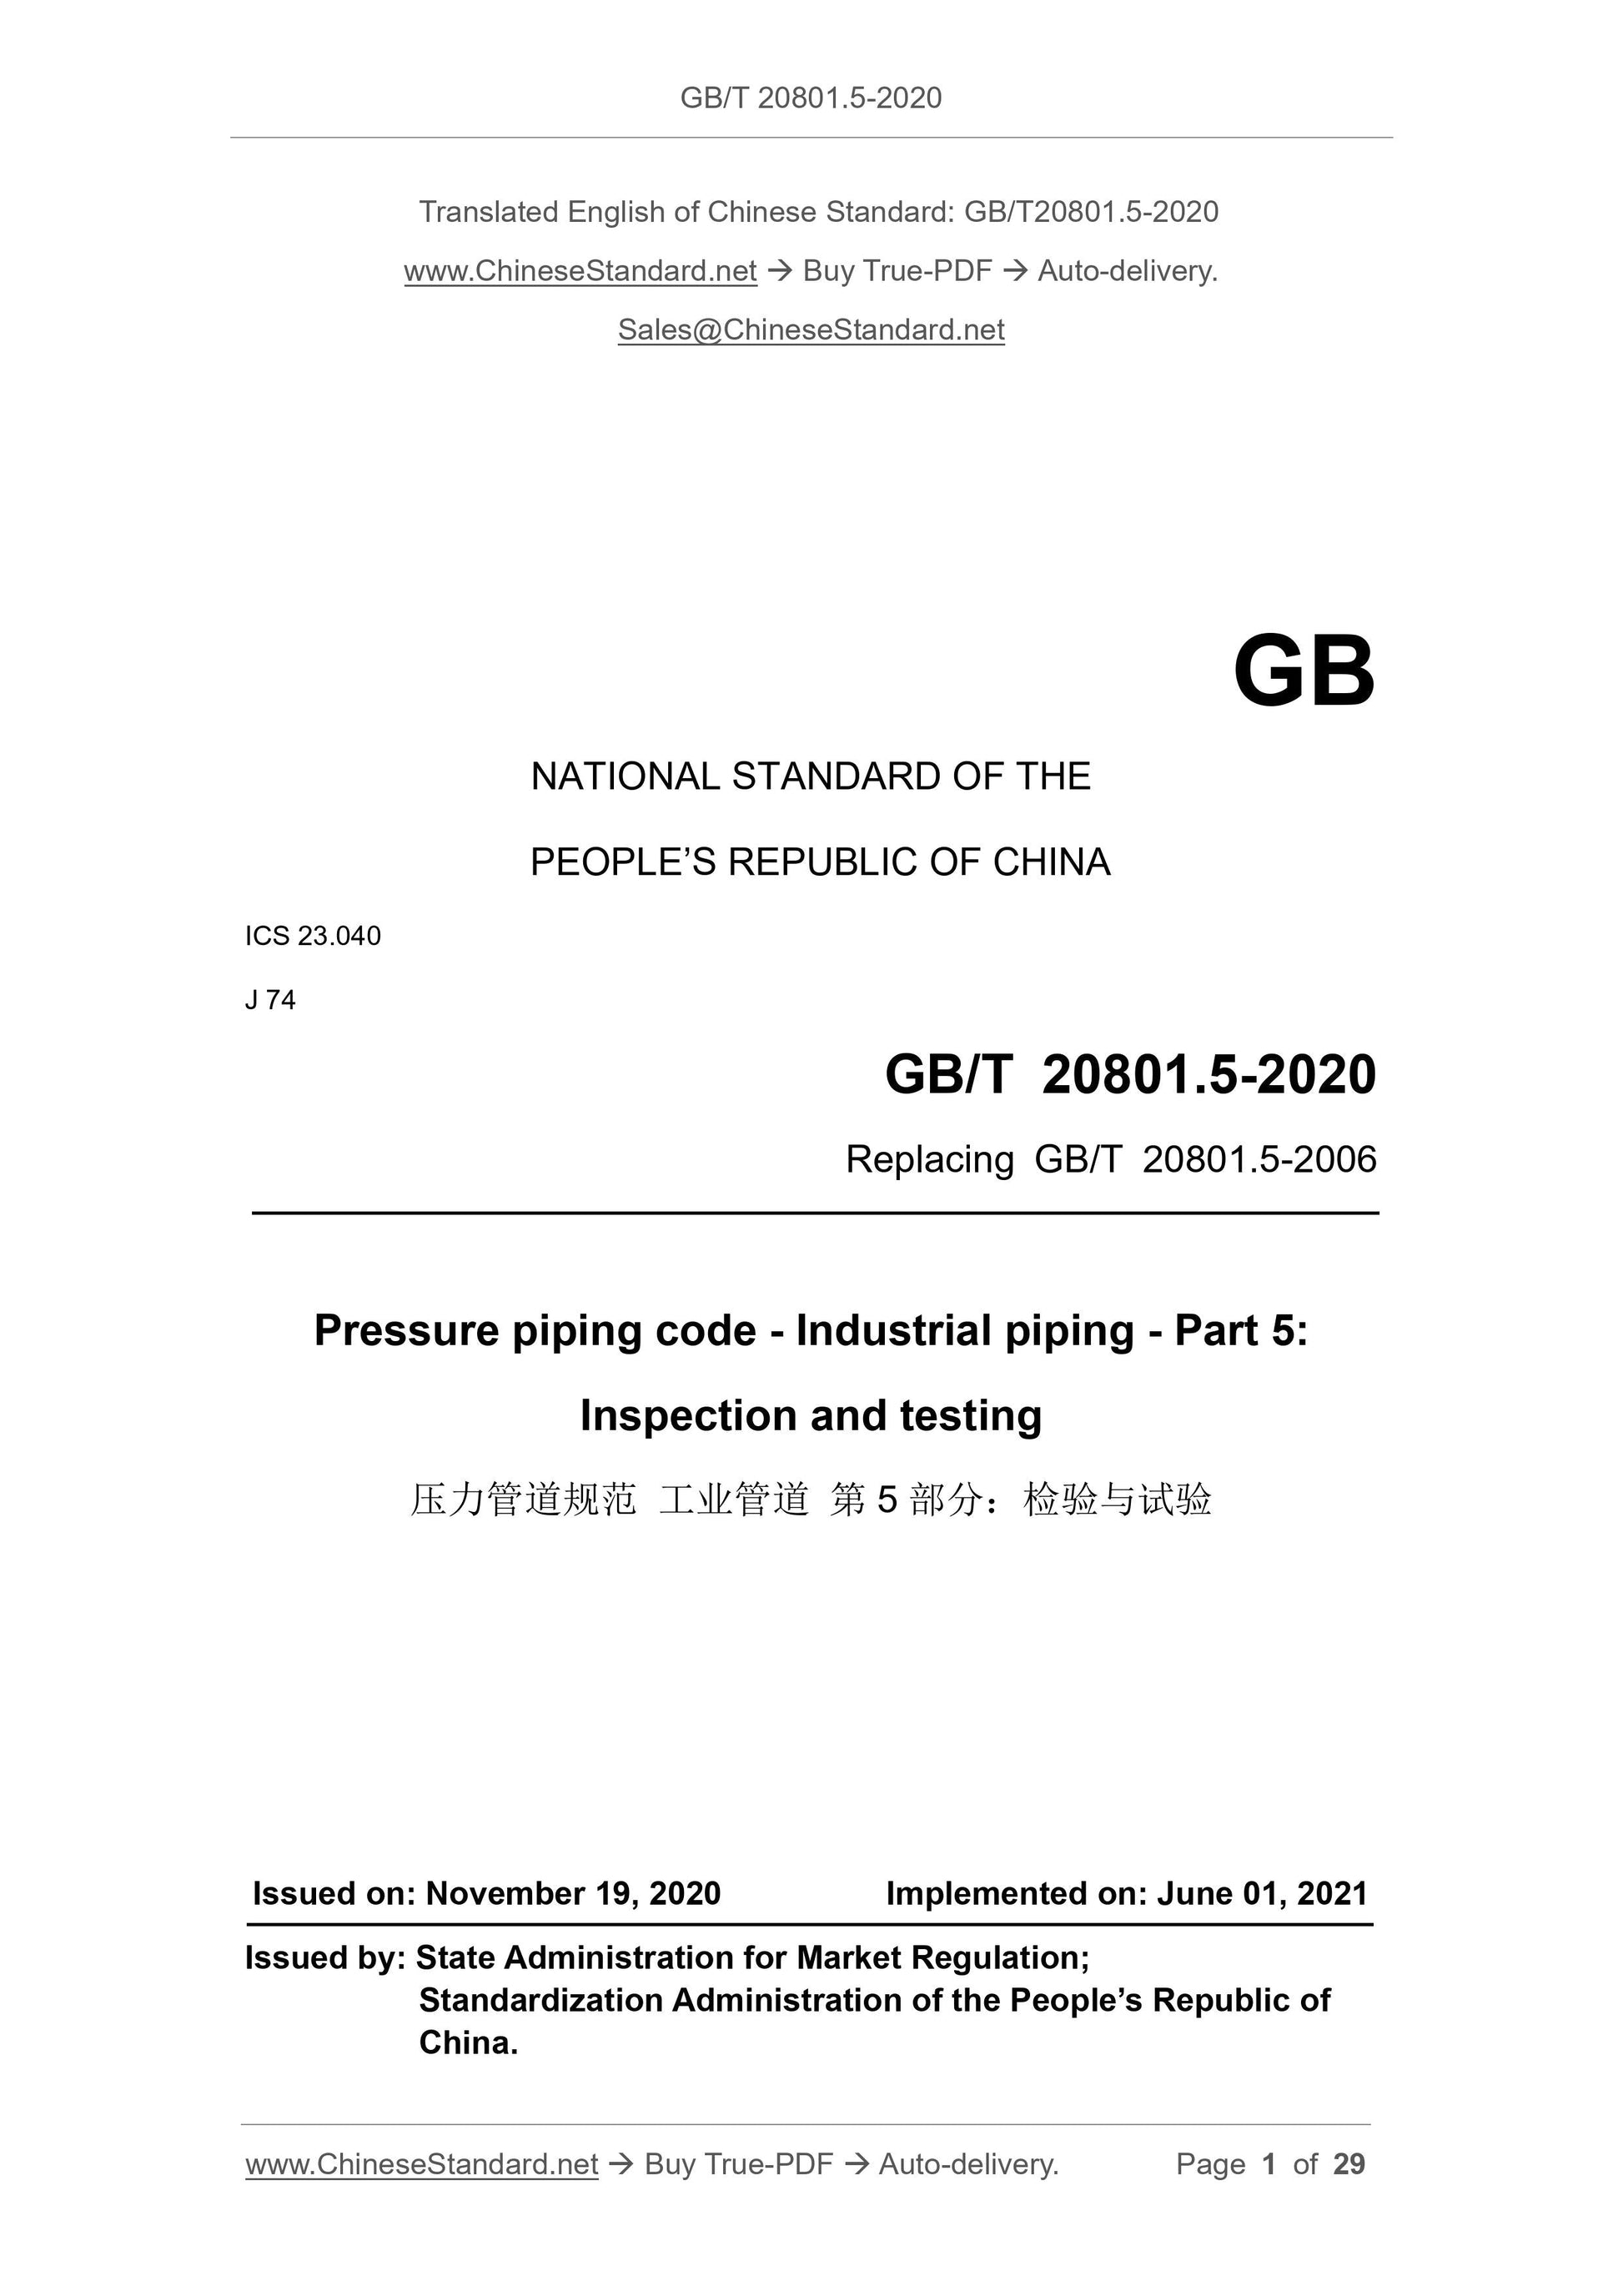 GB/T 20801.5-2020 Page 1